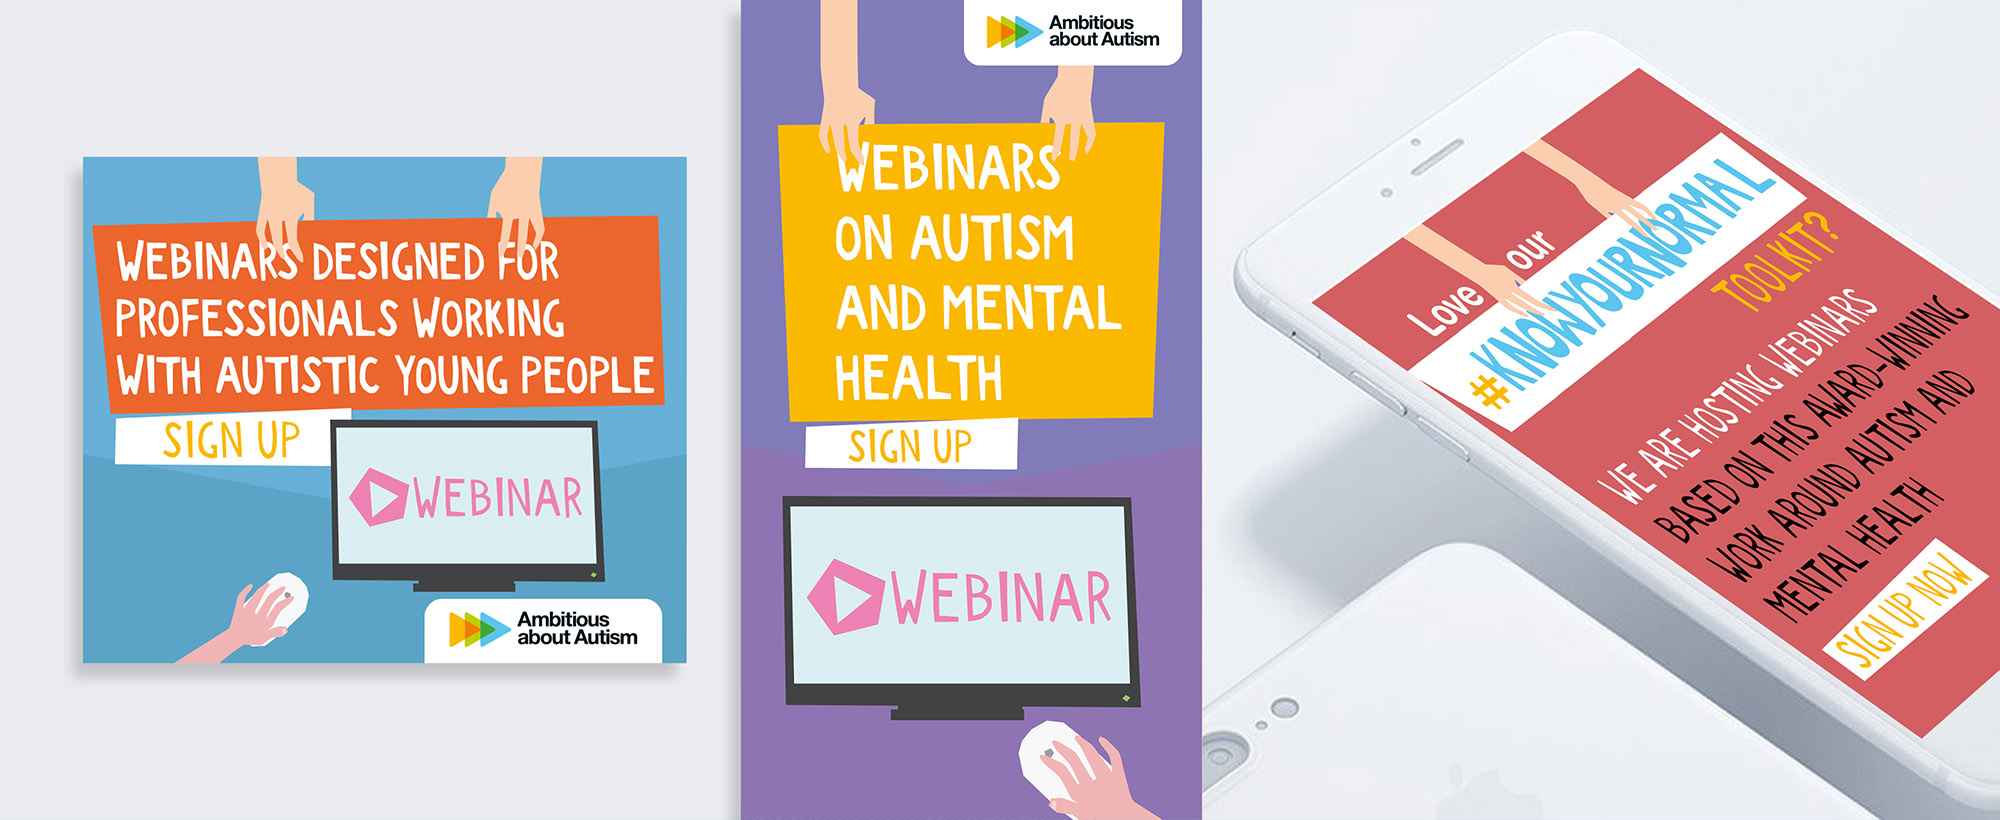 Ambitions about autism Know Your Normal Webinars